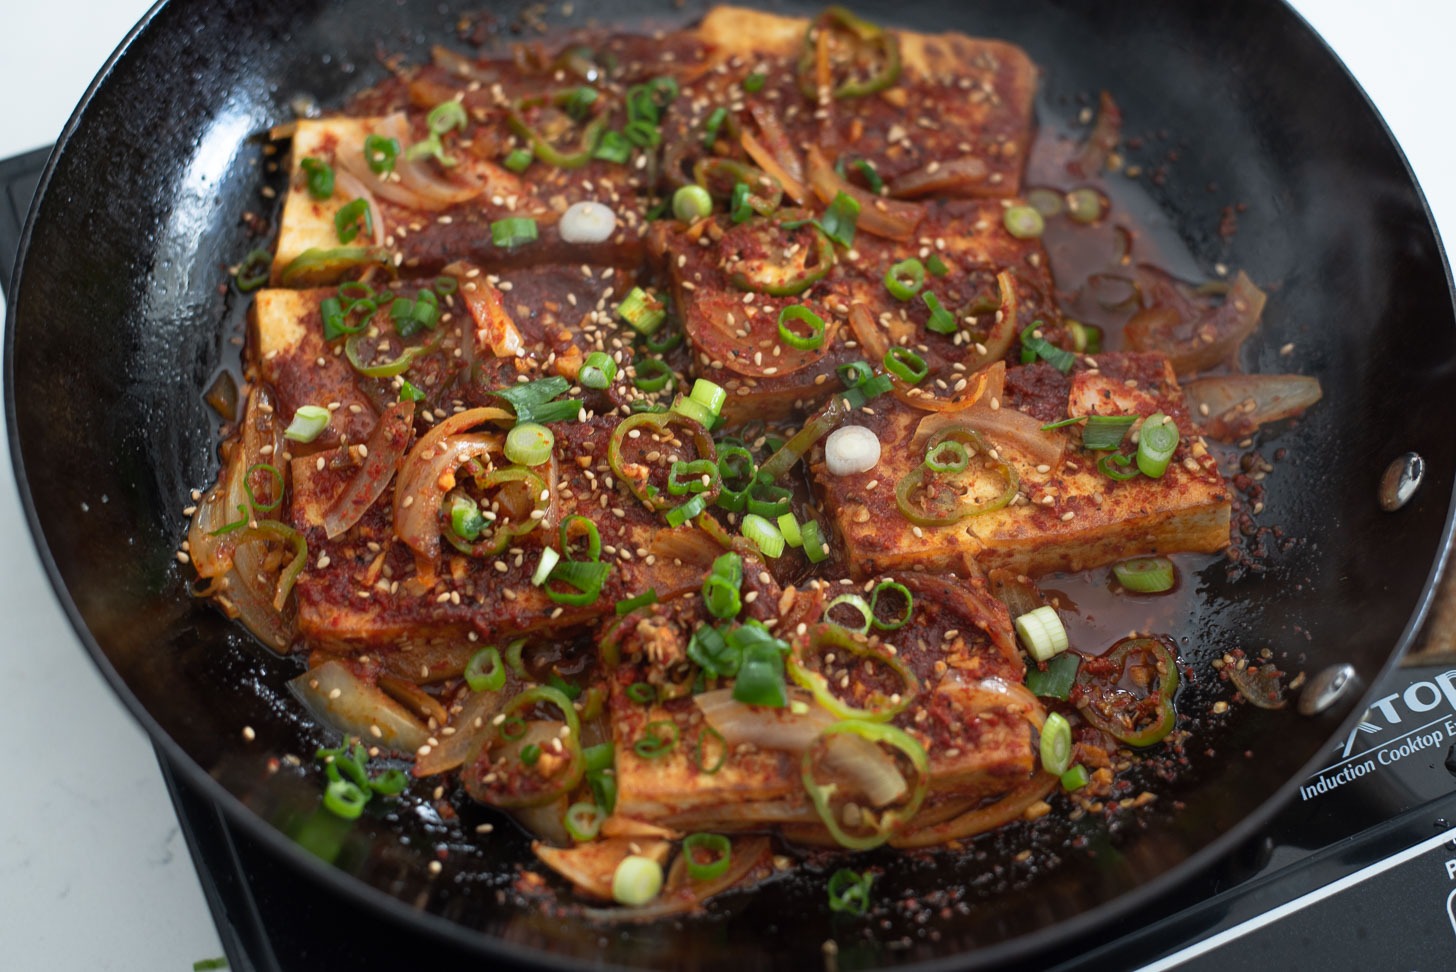 Chopped green onion are added on top of braised tofu as a garnish.